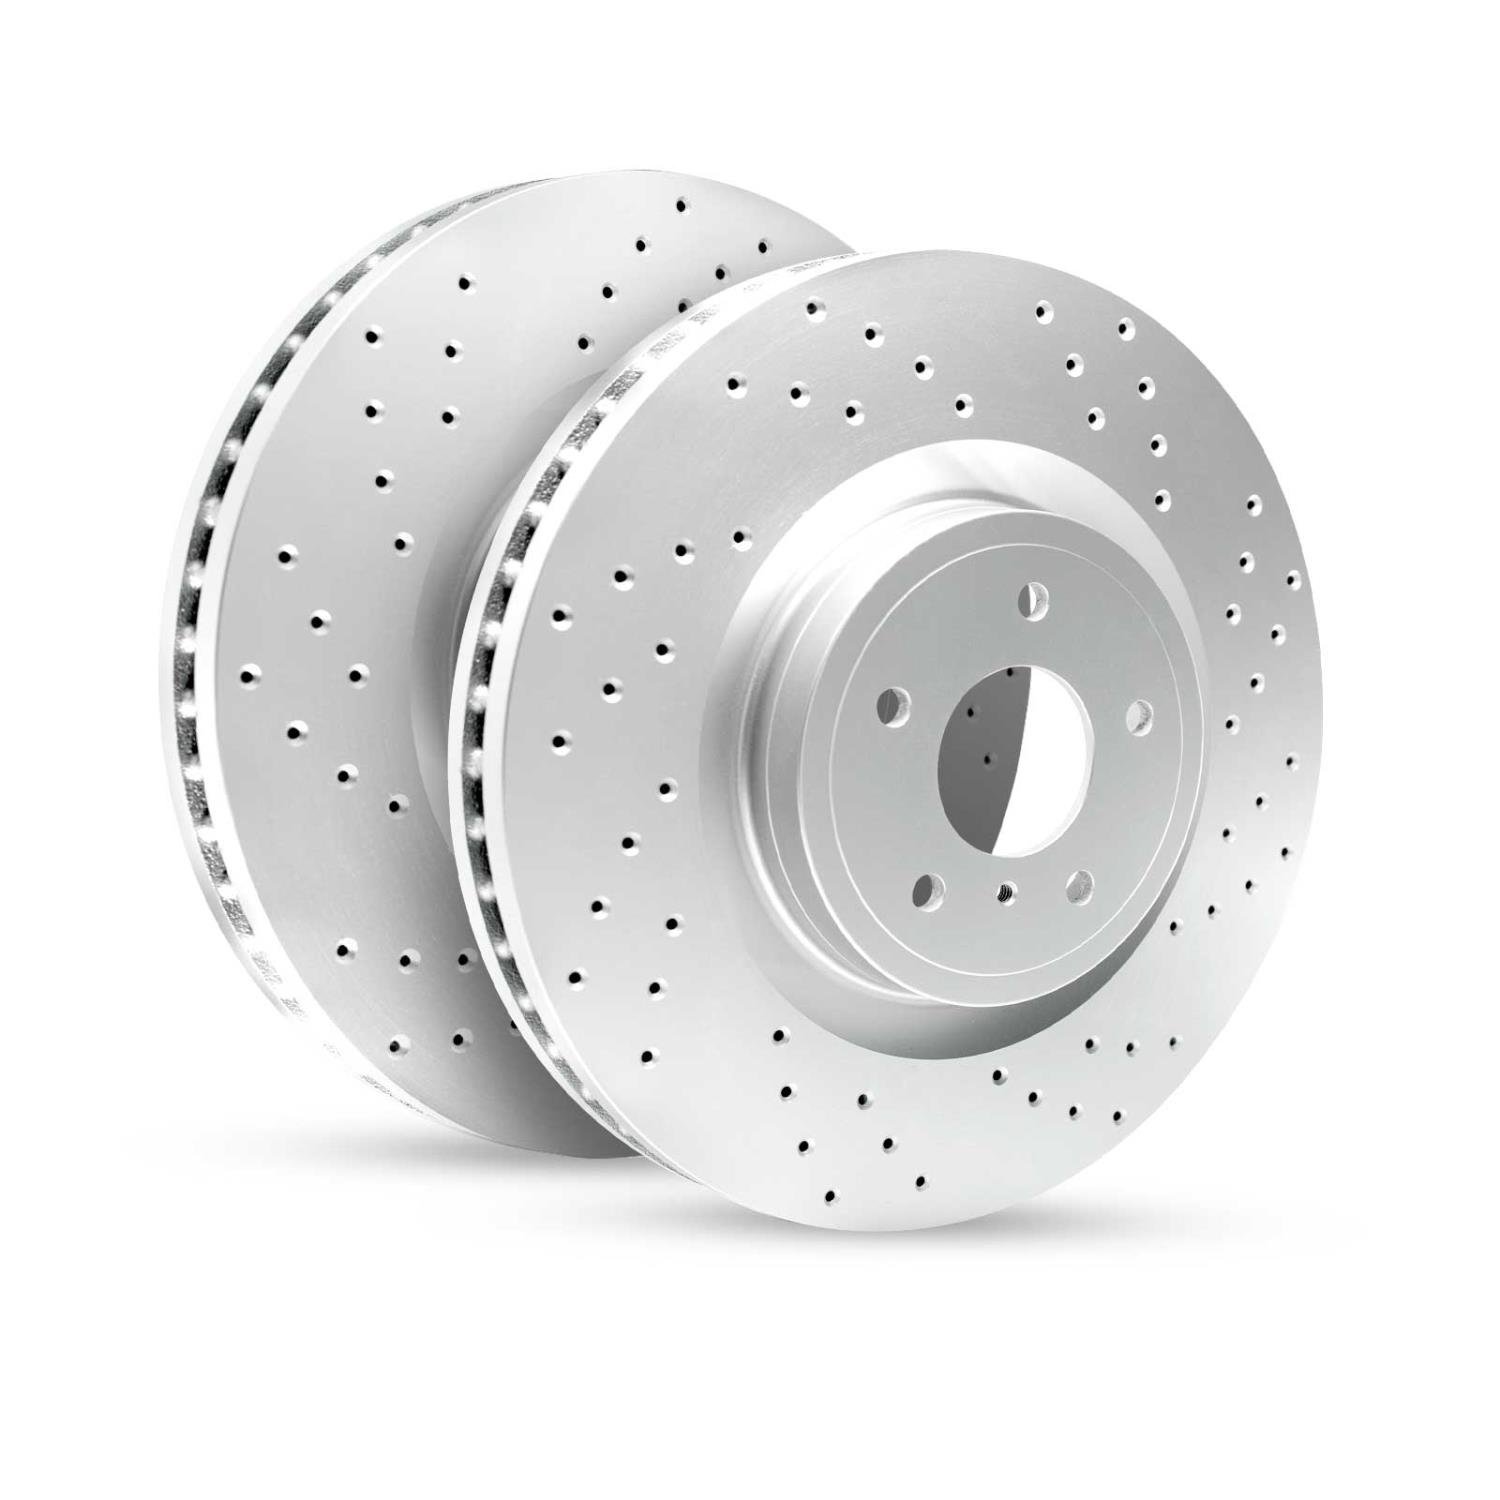 GEO-Carbon Drilled/Slotted Rotors, 2010-2012 Land Rover,